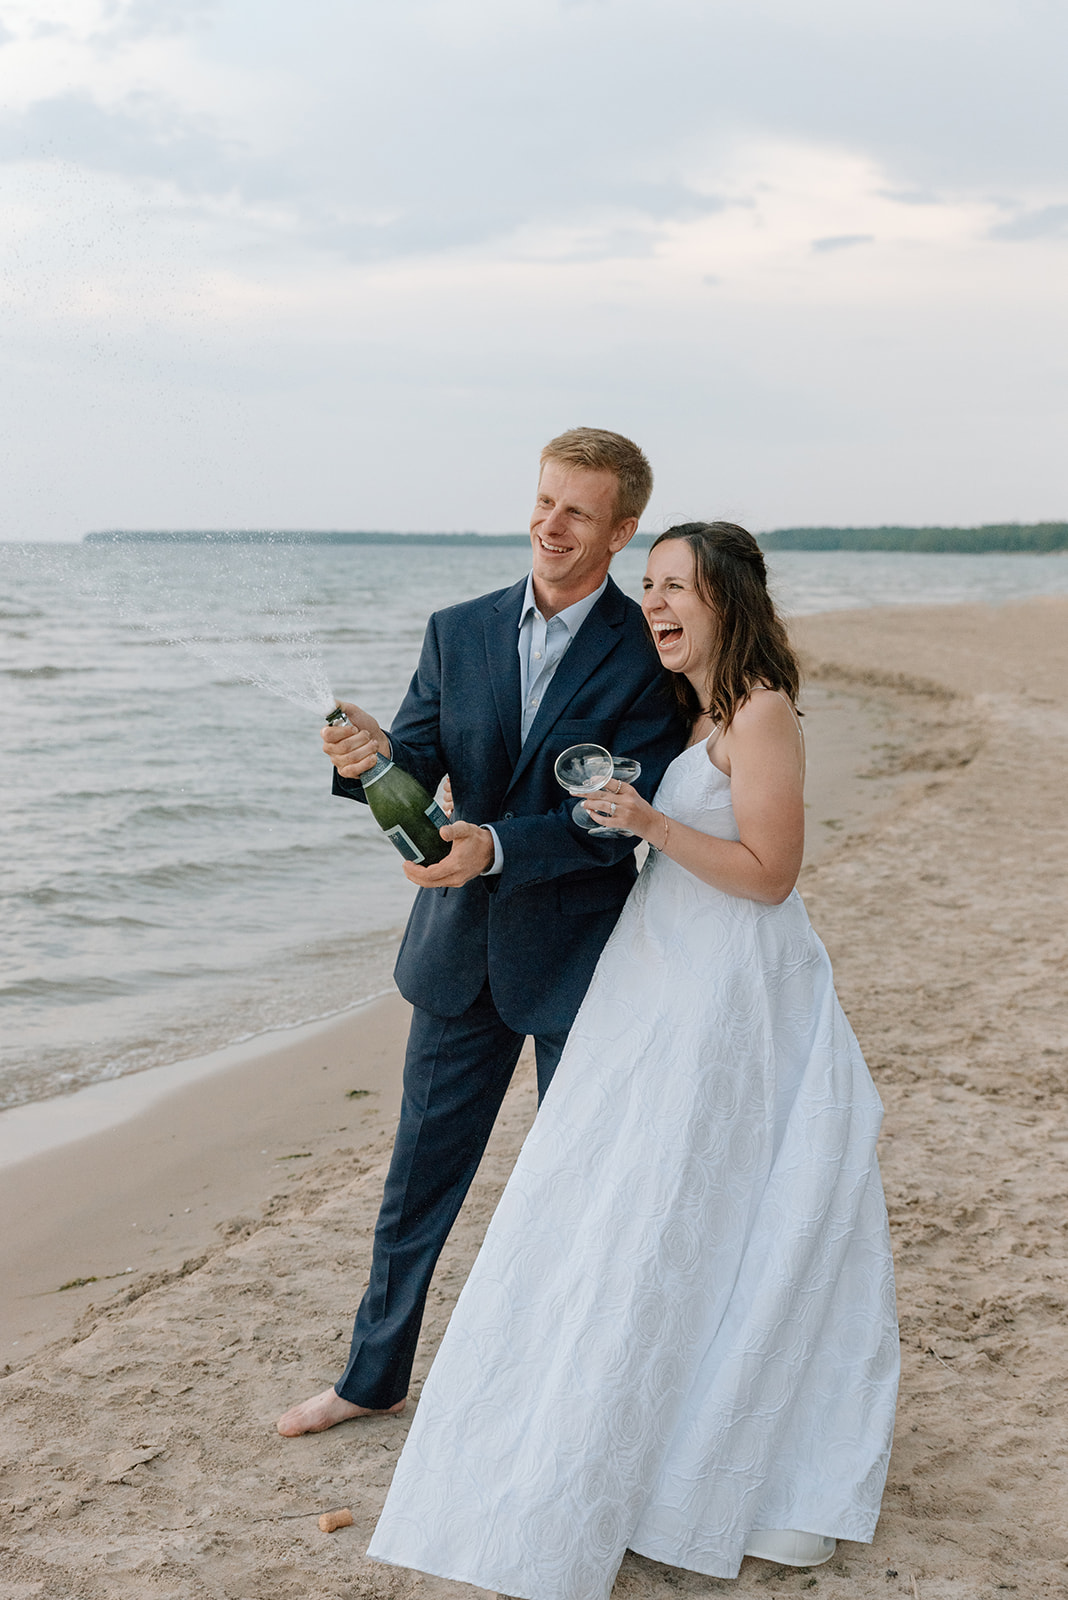 Couple celebrates their vow renewal by popping a bottle of champagne on the beach